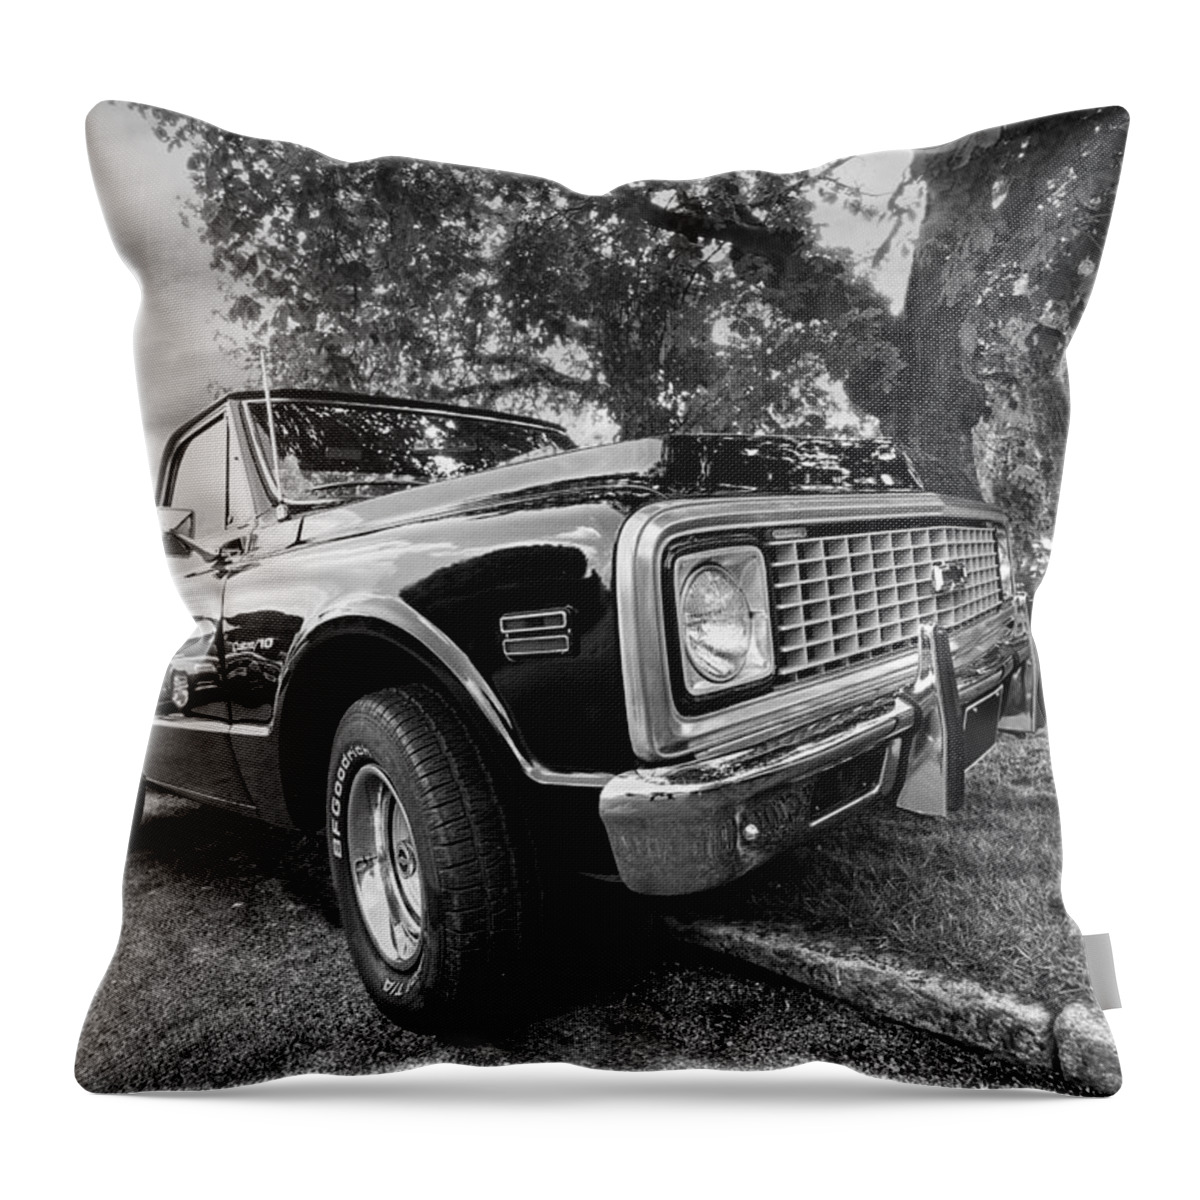 Chevrolet Truck Throw Pillow featuring the photograph Halcyon Days - 1971 Chevy Pickup BW by Gill Billington